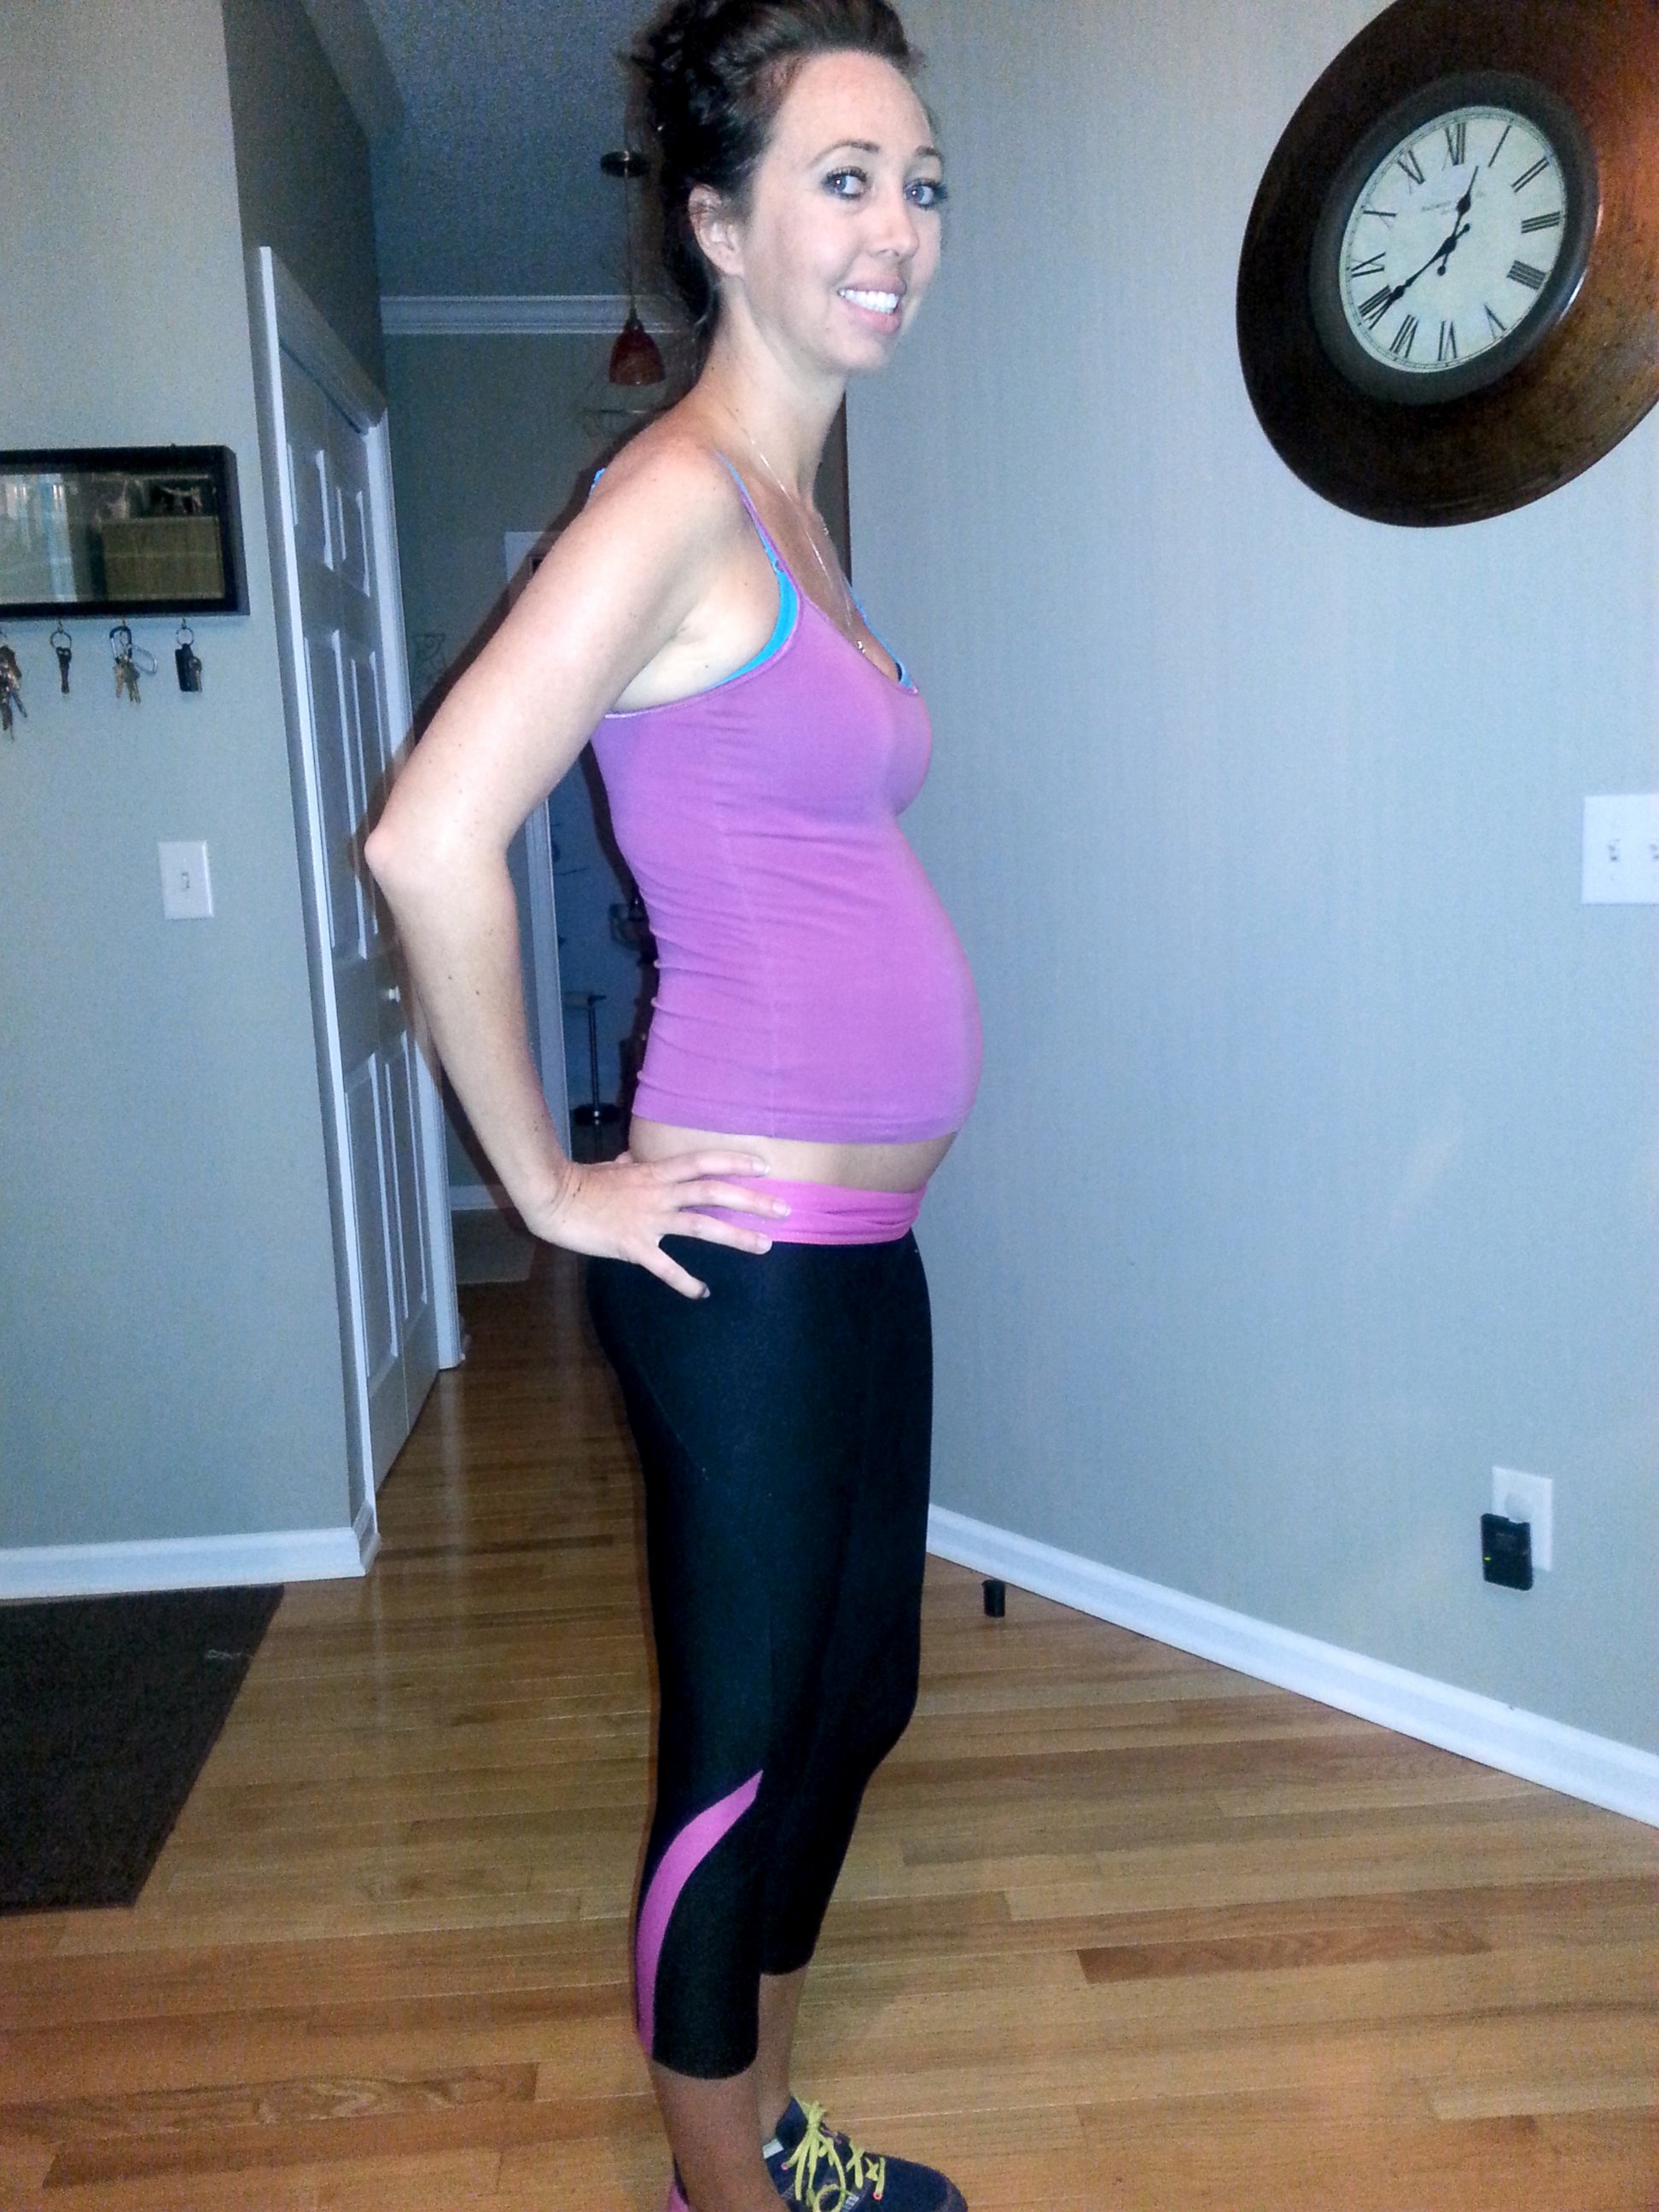 PHOTO: Melissa Mantor said she was asked to leave a Planet Fitness gym because of her partially exposed pregnant belly. Here, a photo of Mantor wearing the same outfit she was wearing the day of the incident.